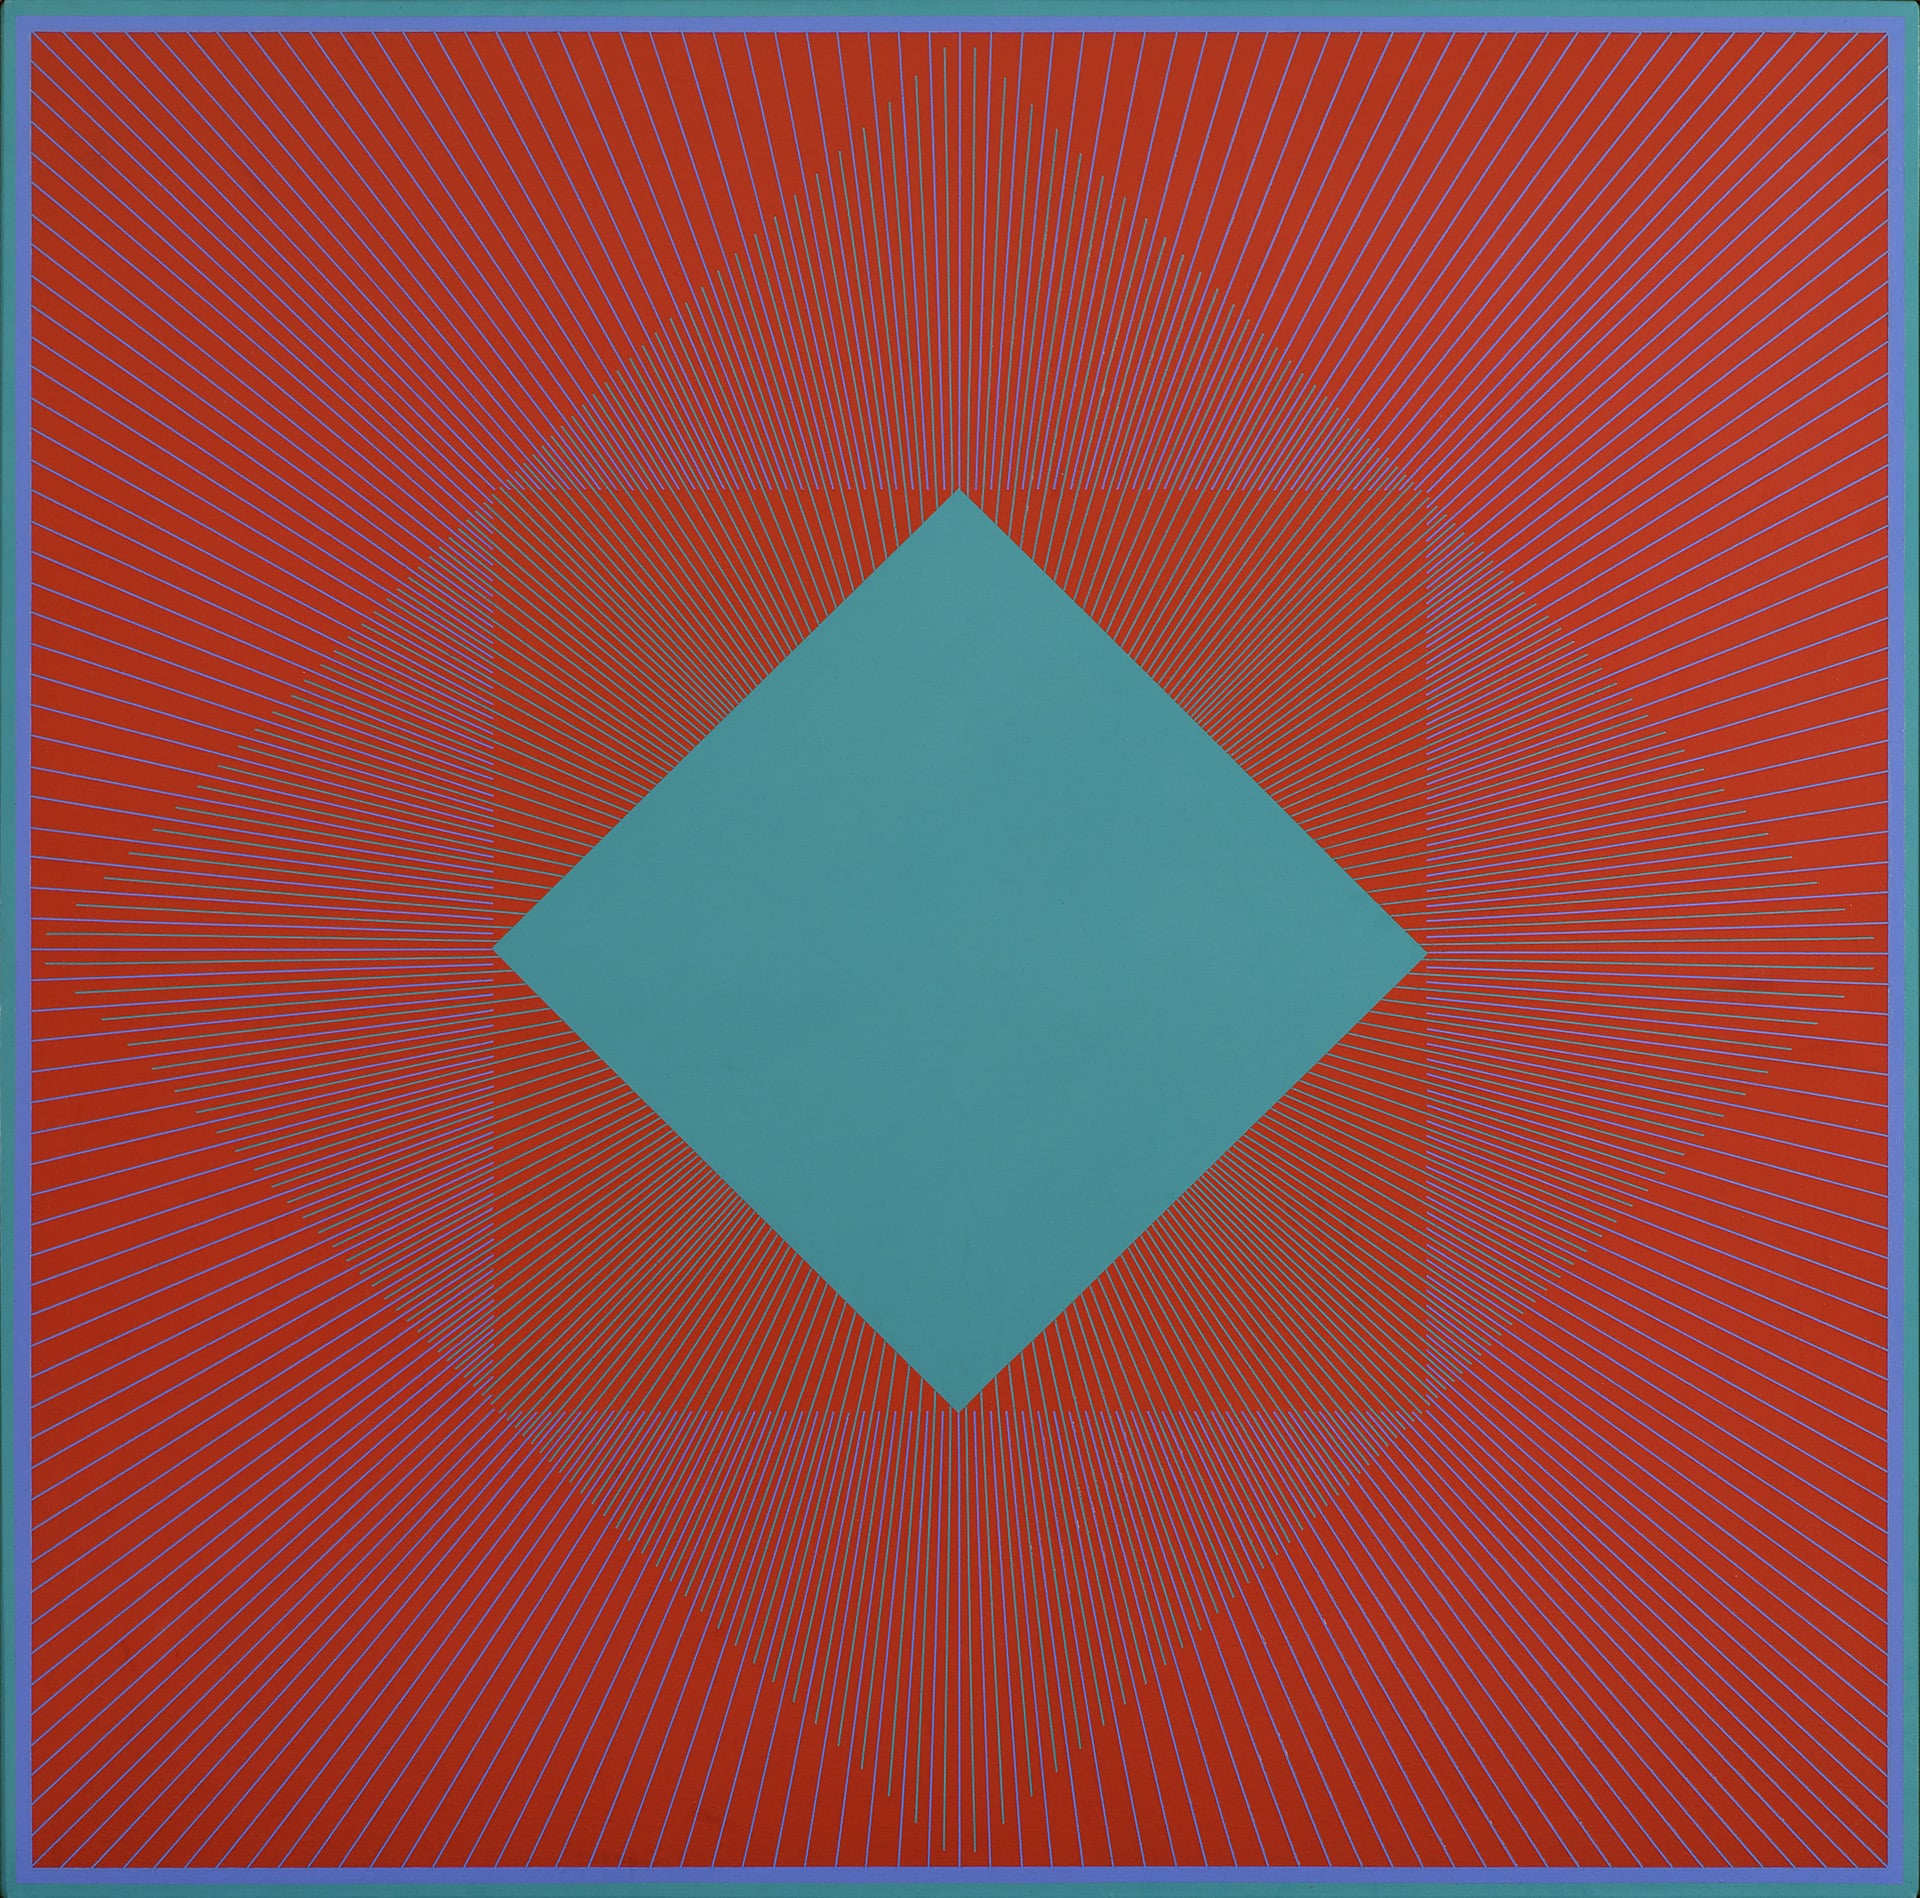 a blue diamond on a red background with a larger, lighter blue diamond overlaid